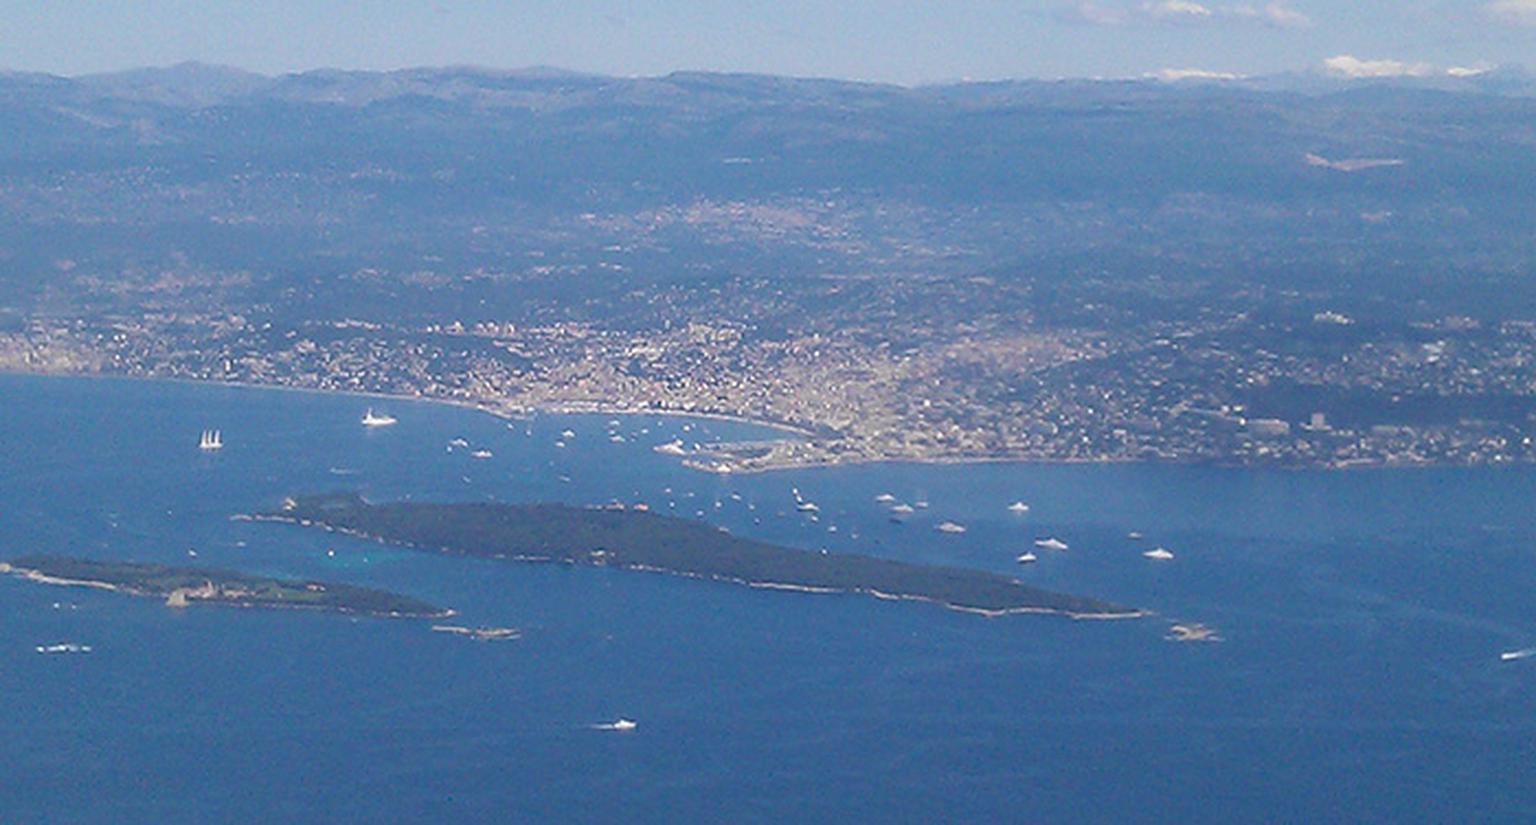 Cannes-from-the-air.jpg